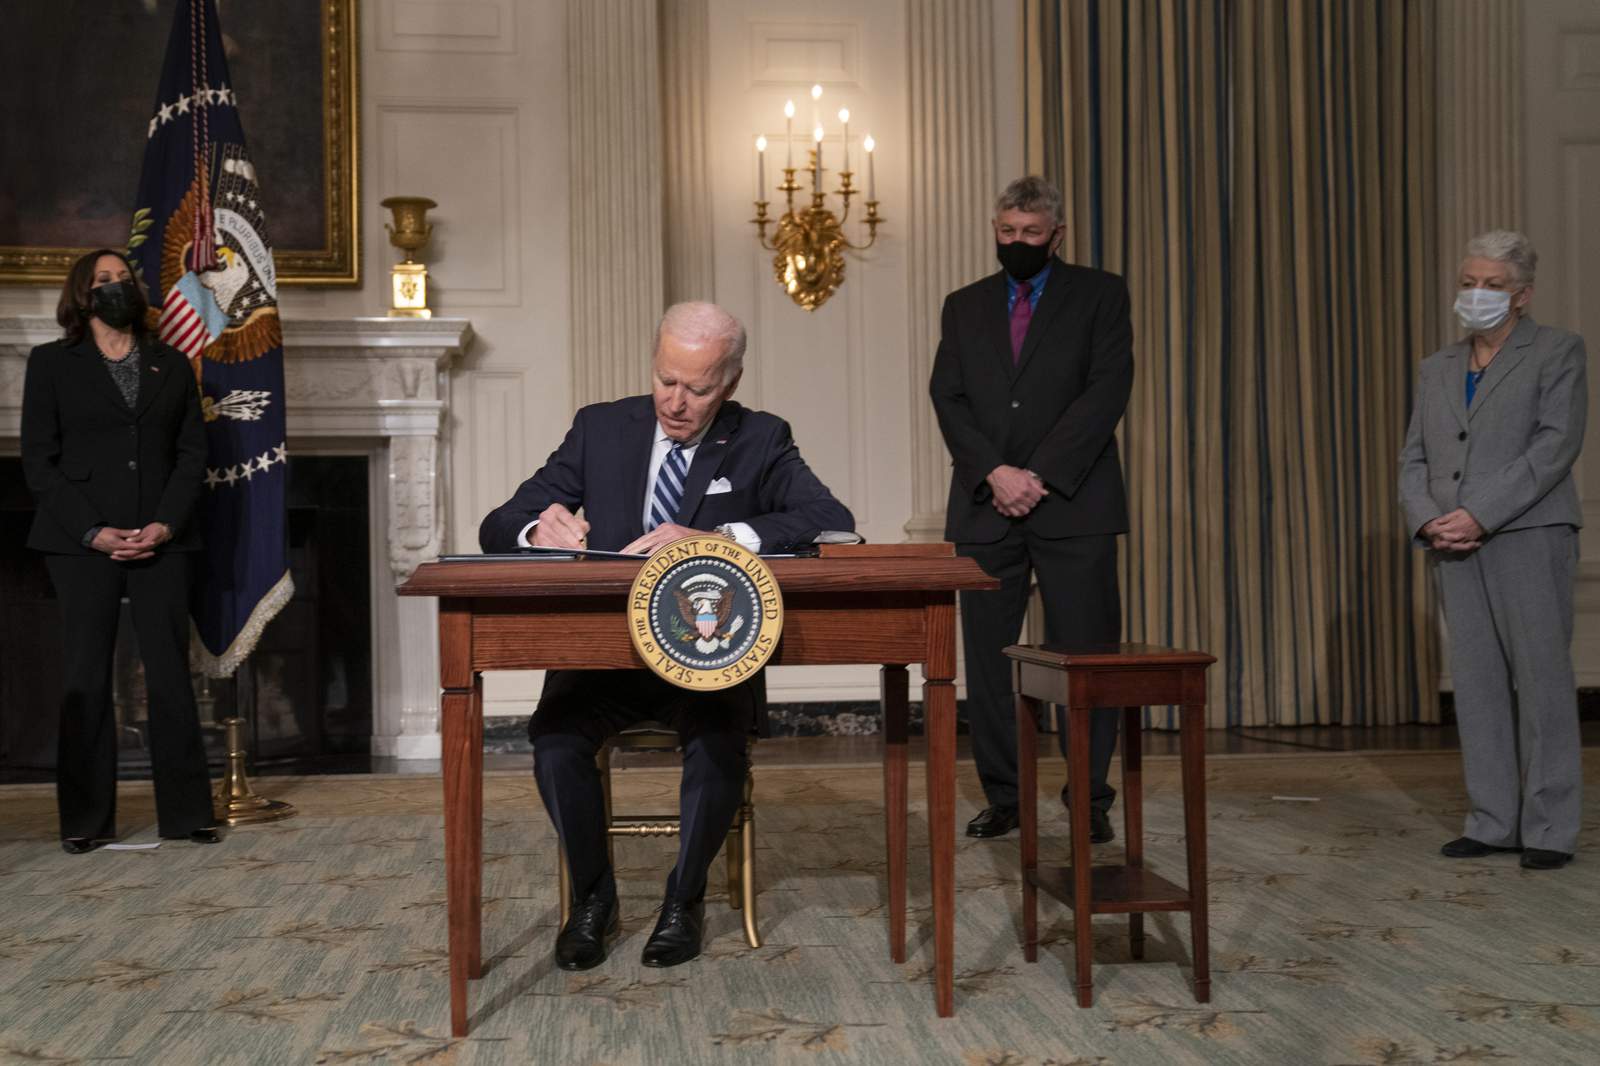 EXPLAINER: Executive orders can be swift but fleeting